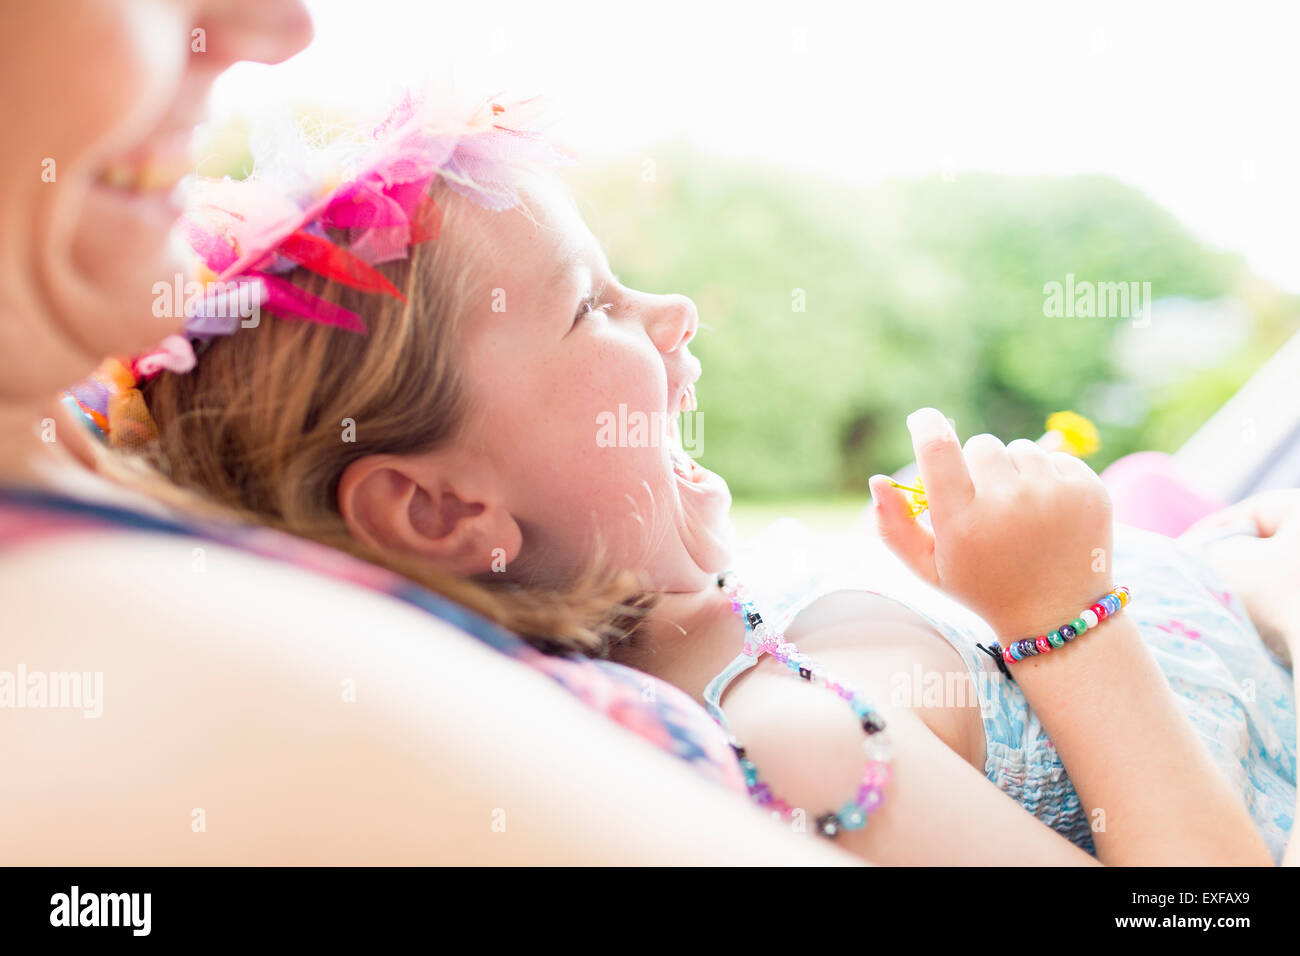 Daughter lying on mother's lap, laughing Stock Photo